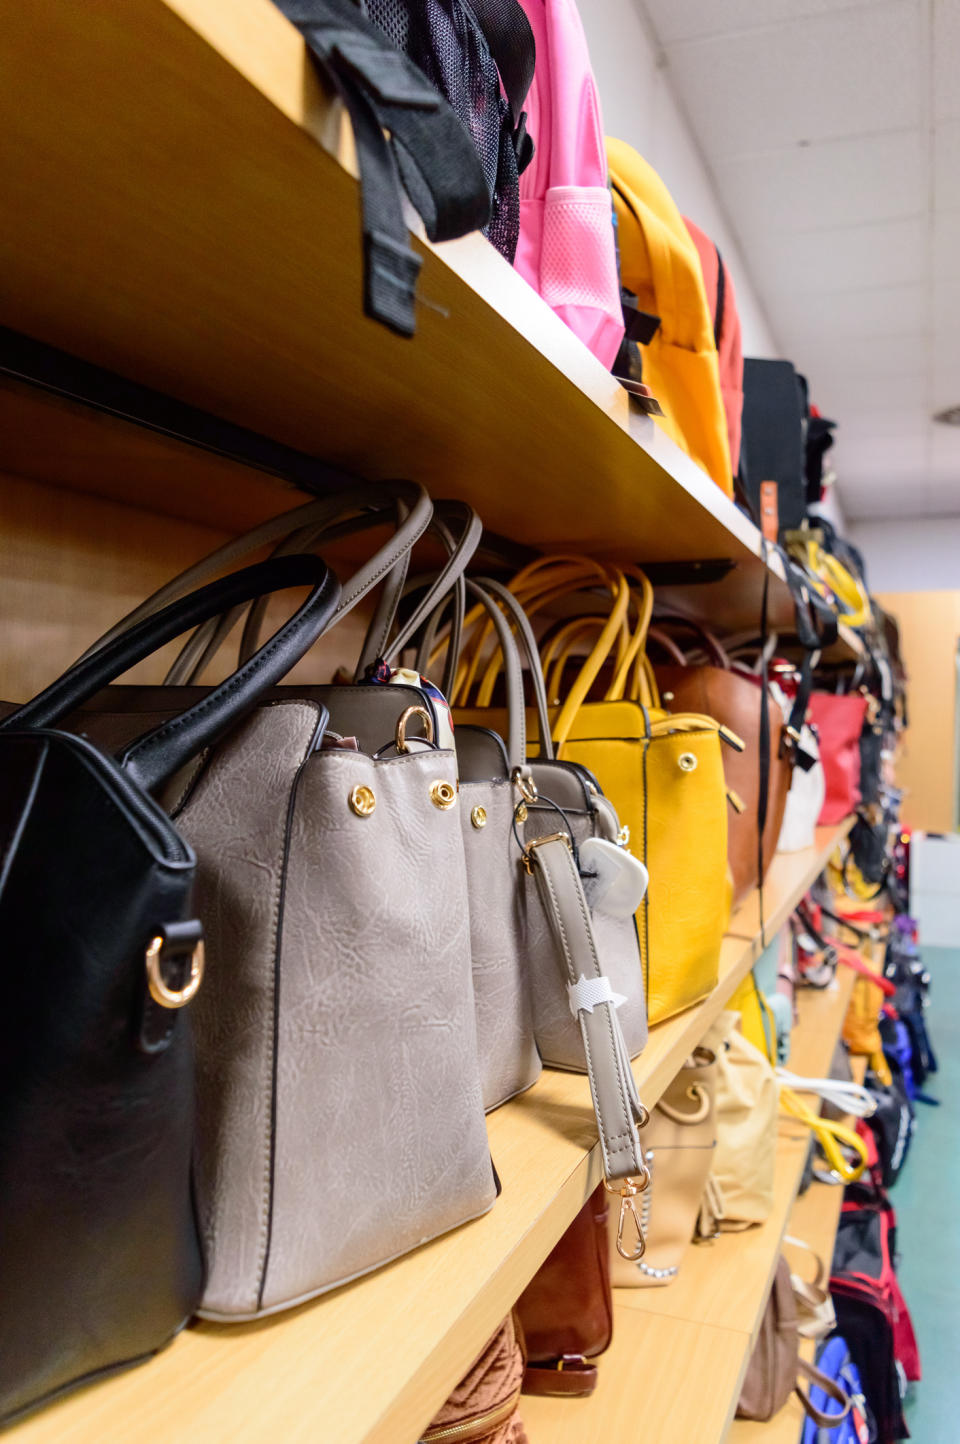 Shelves filled with various handbags in different styles and sizes, organized neatly in a store